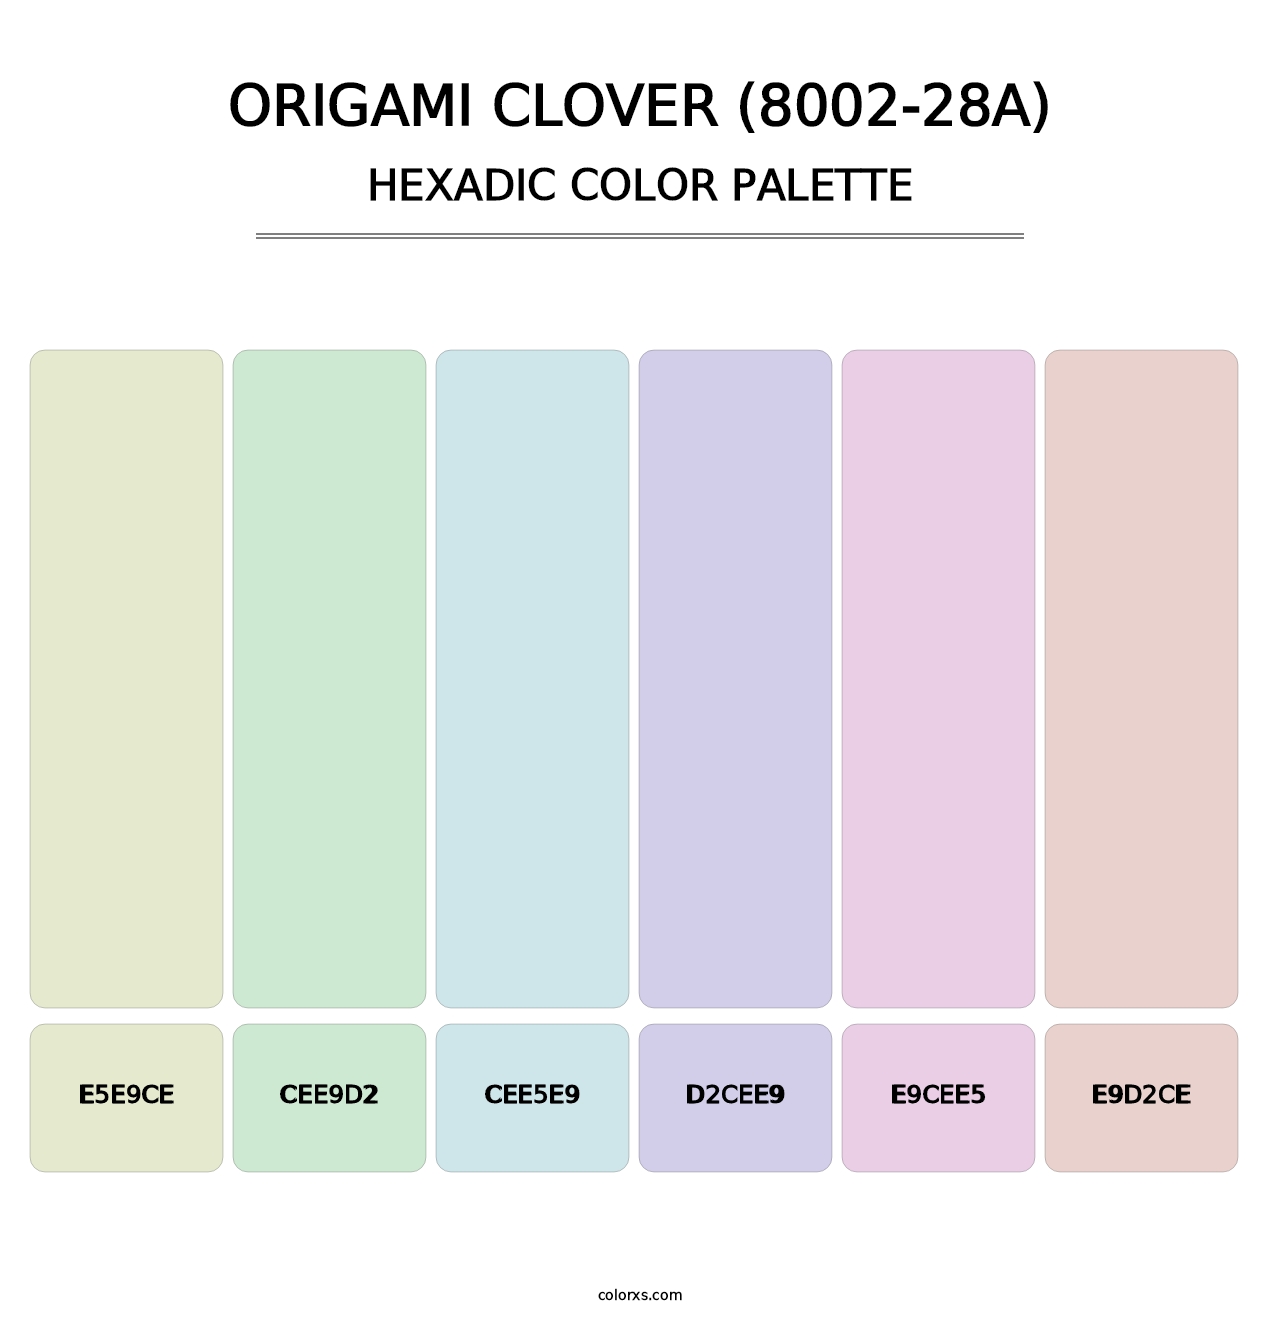 Origami Clover (8002-28A) - Hexadic Color Palette